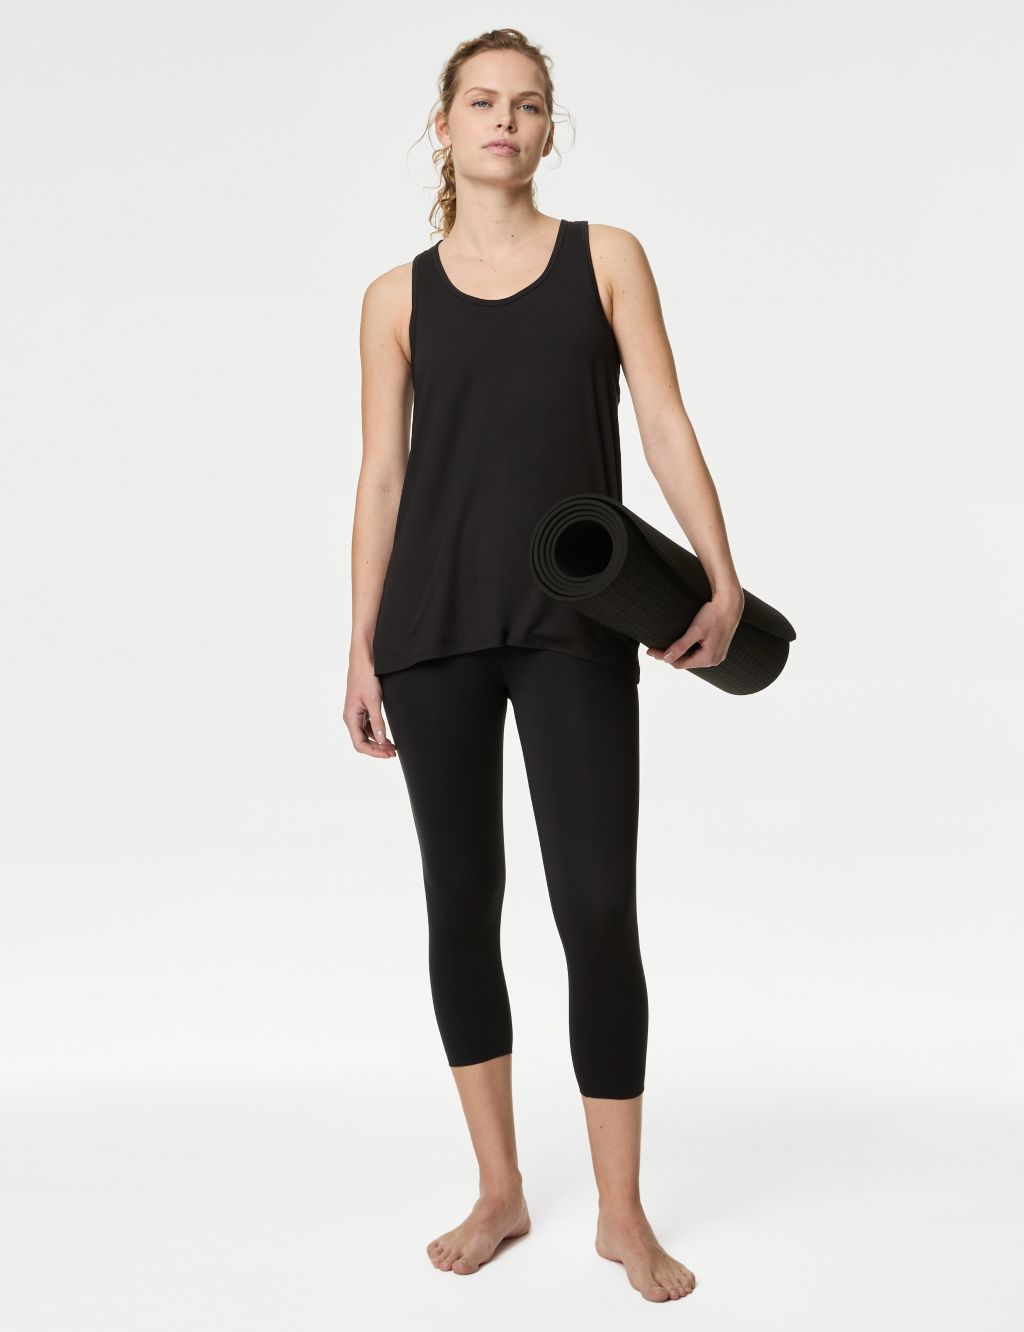 Scoop Neck Relaxed Sleeveless Yoga Top image 3